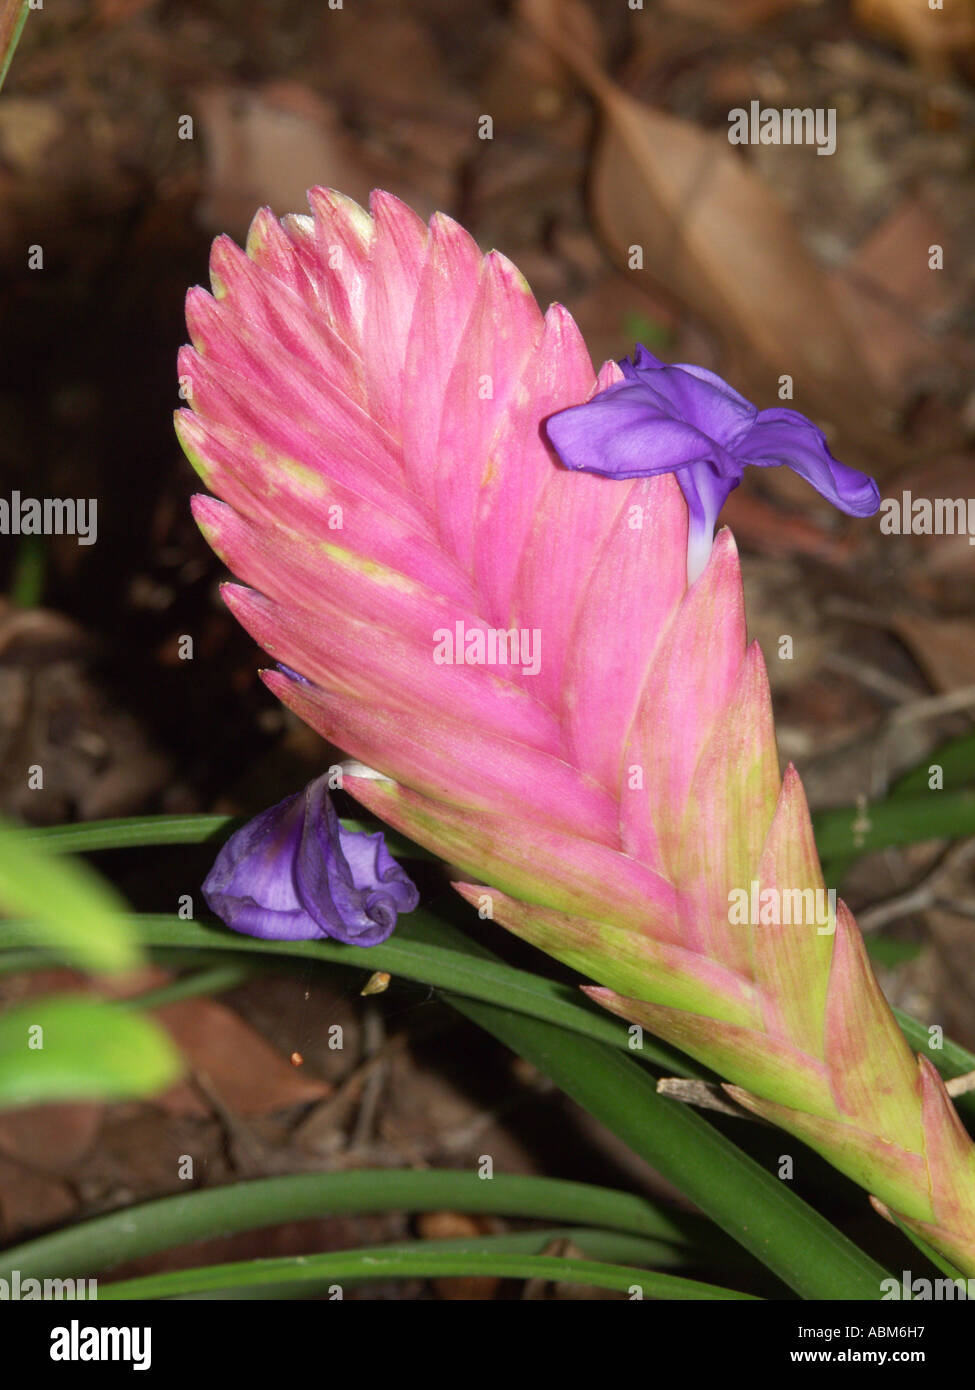 Bract and flower of Tillandsia cyanea, a member of the Bromeliad family of plants Stock Photo